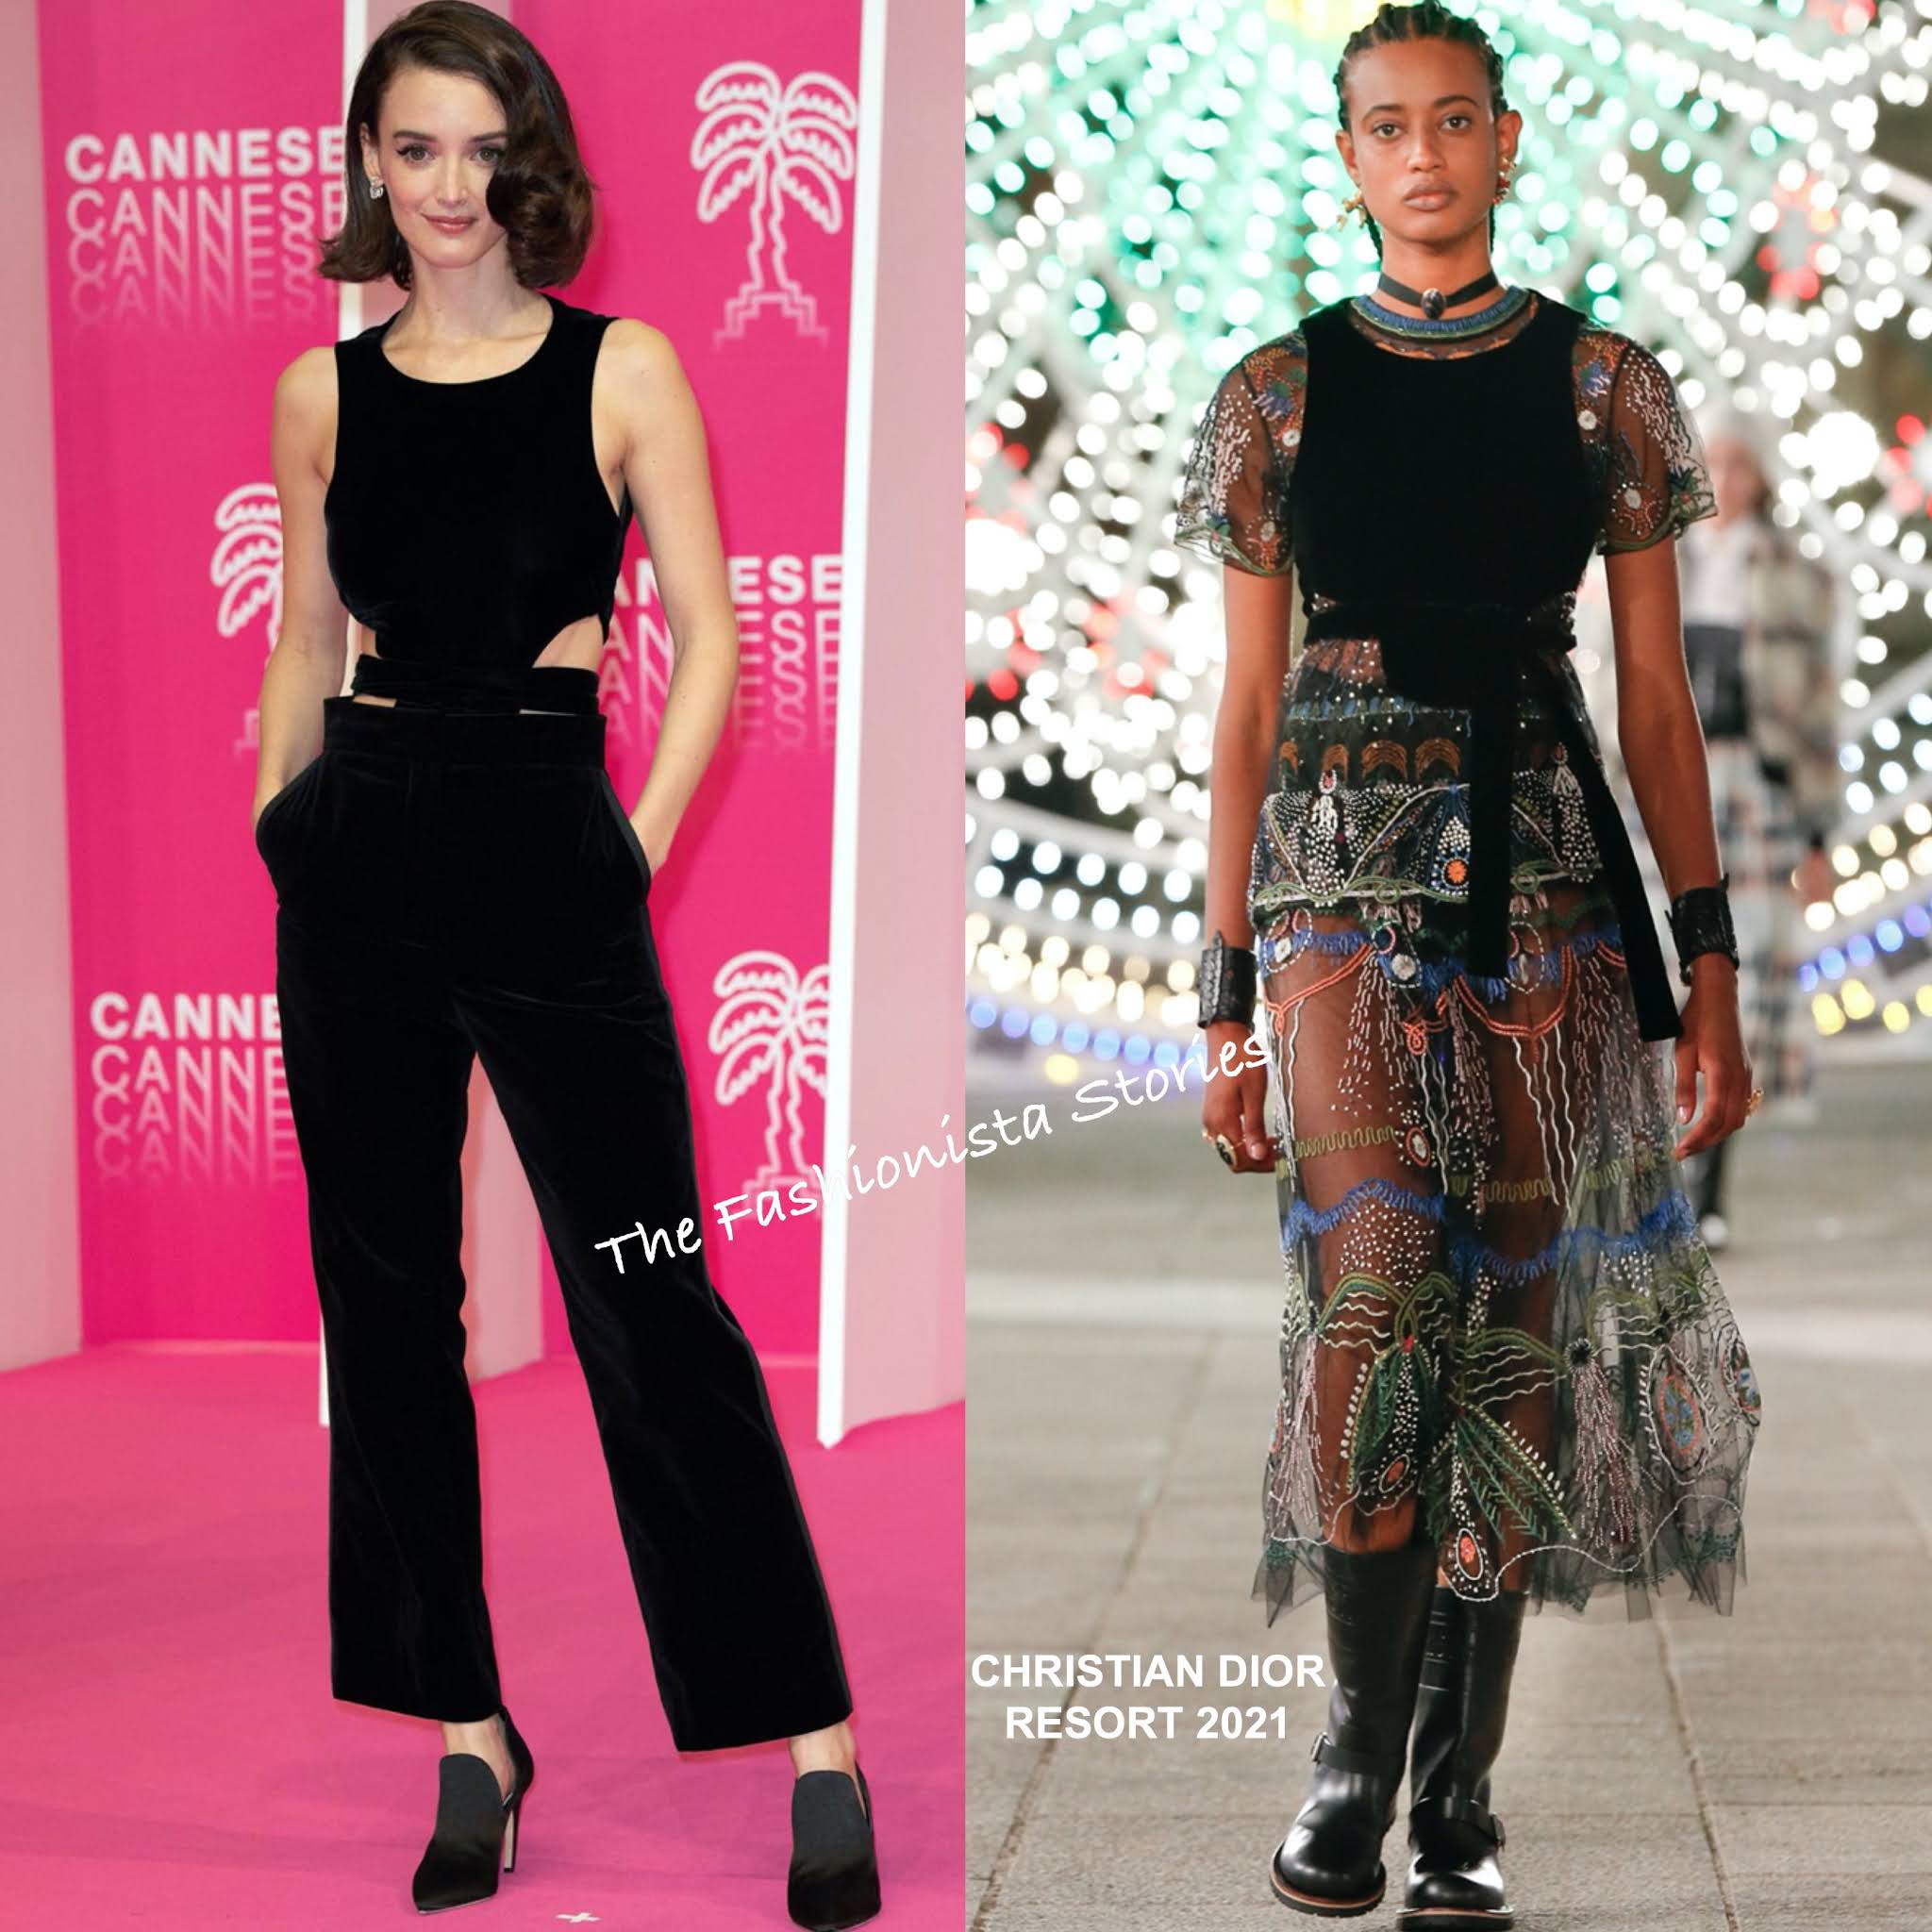 Charlotte Le Bon in Christian Dior at the 3rd Canneseries Film Festival